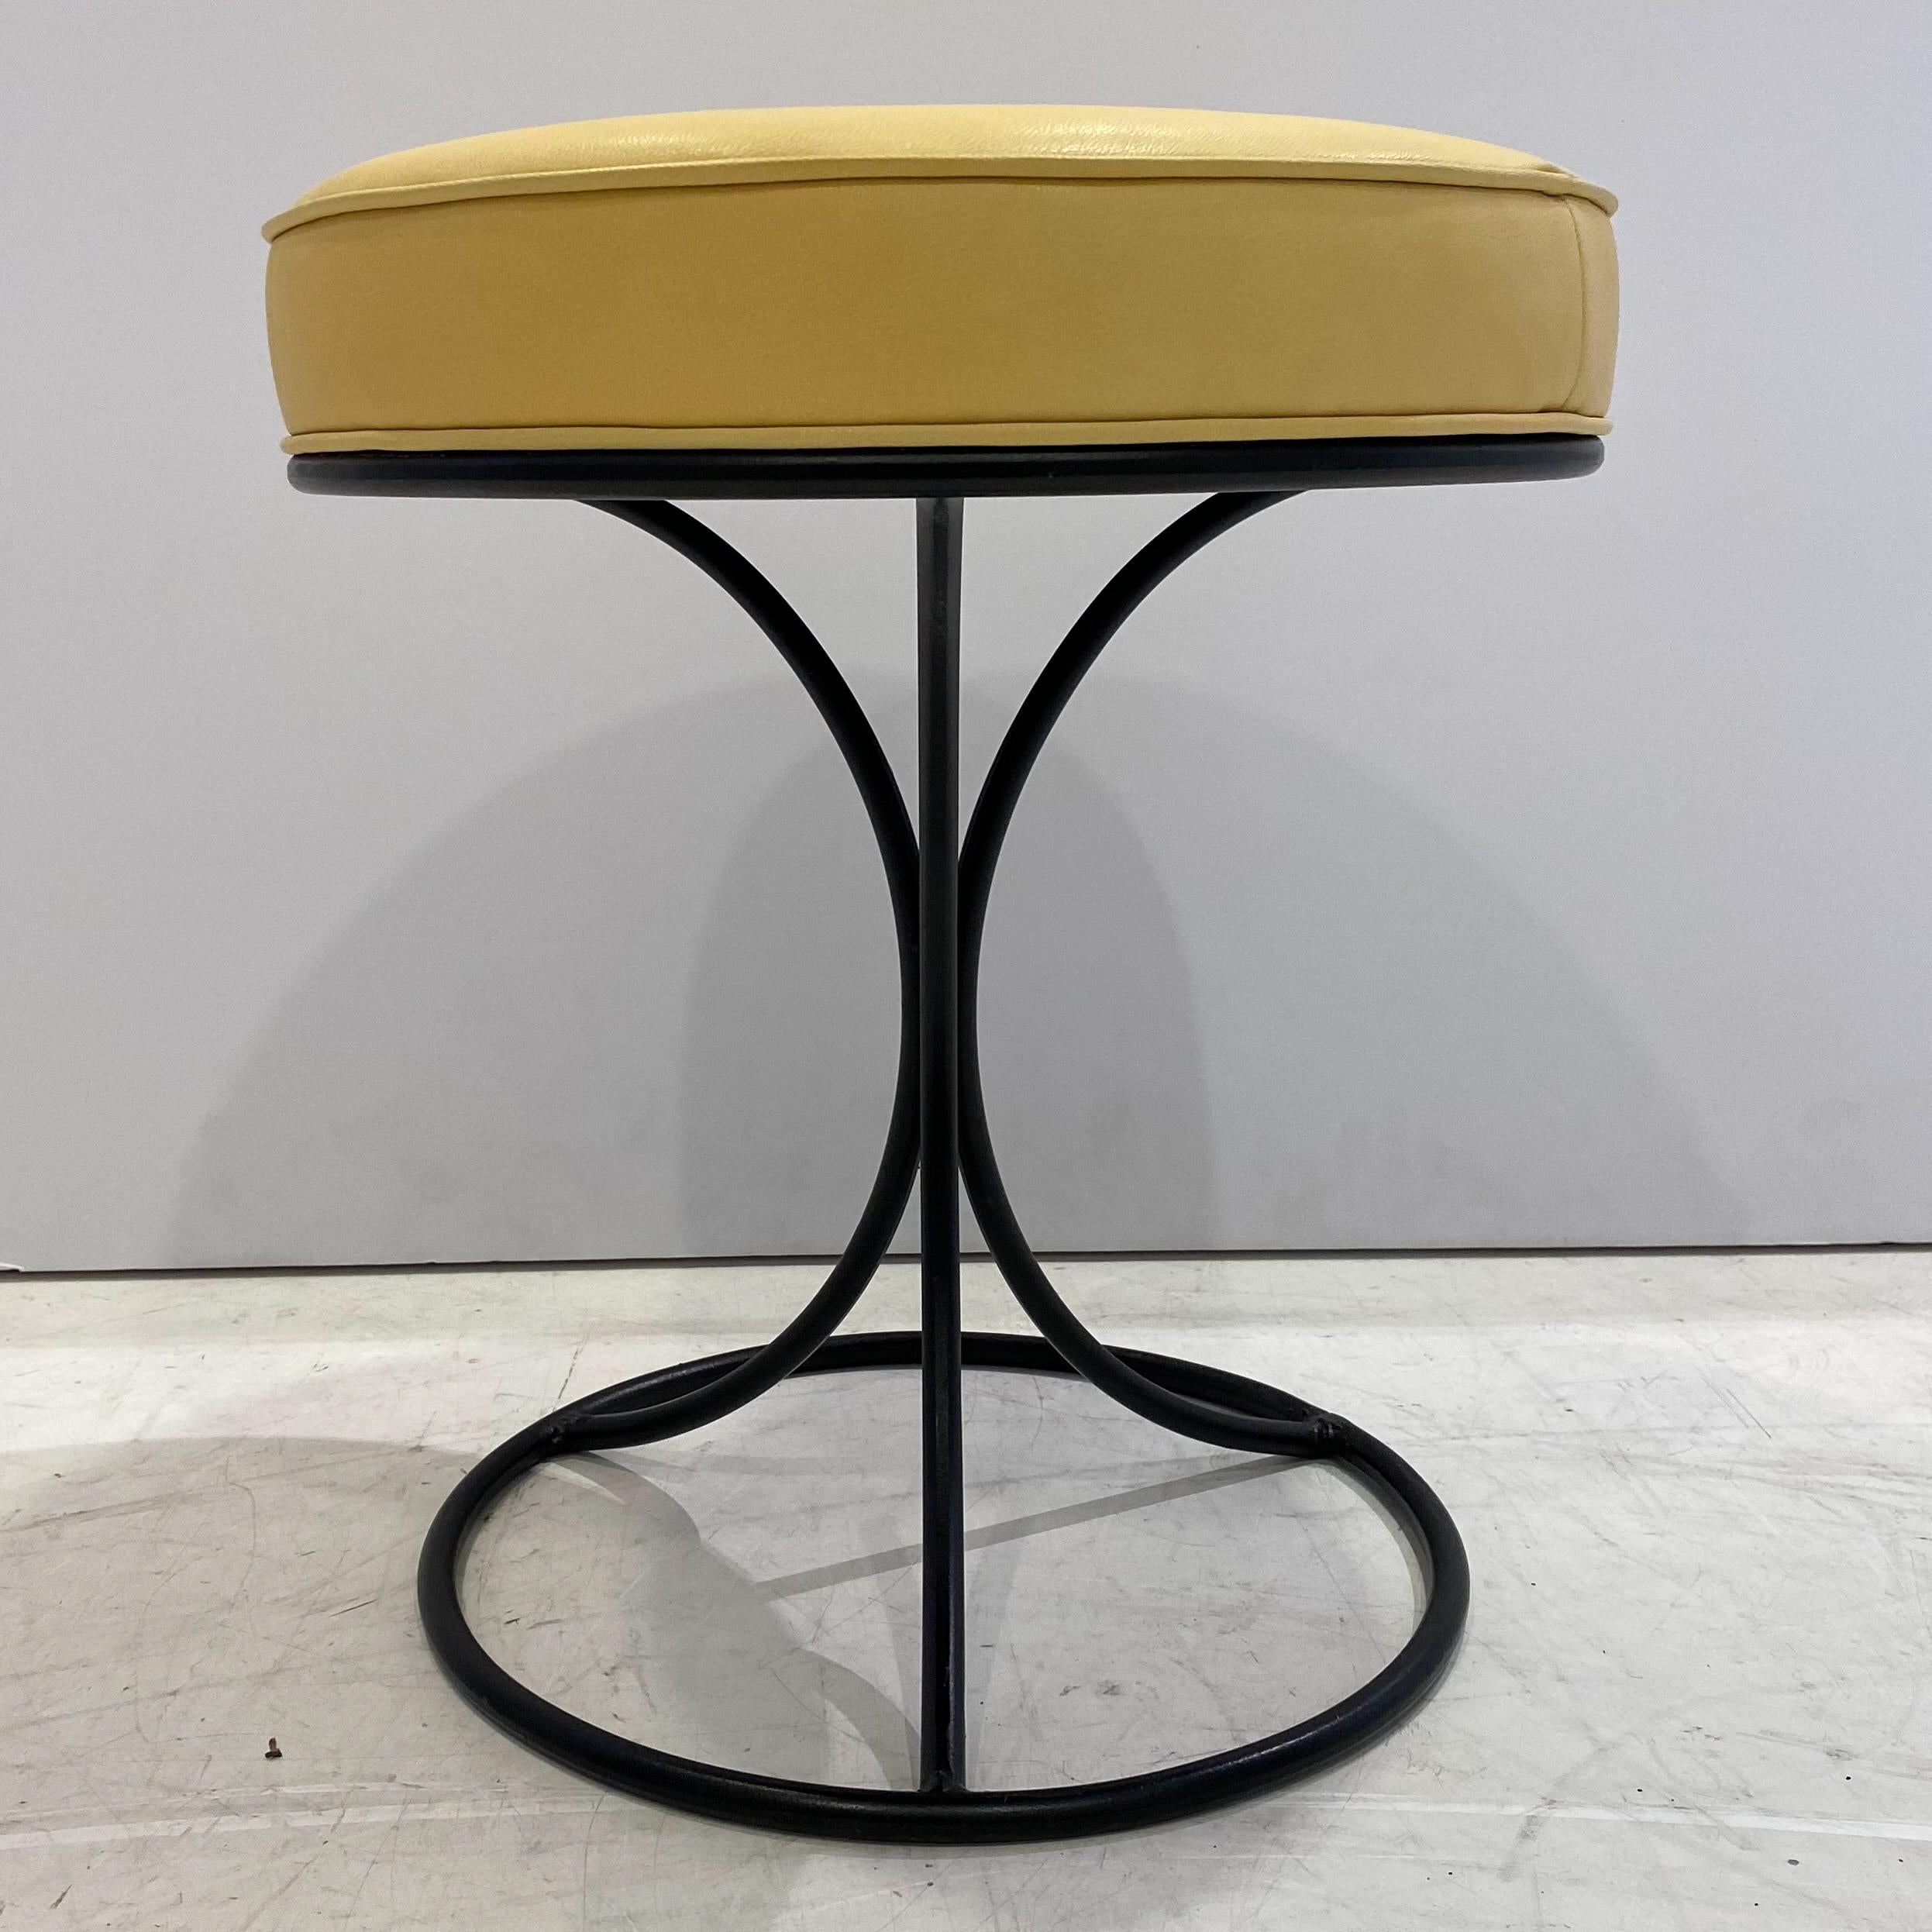 Low stool or footrest with repainted extruded steel base and cushion reupholstered in yellow leather. A rarely seen midcentury design by Darrel Landrum, produced by Avard Furniture.